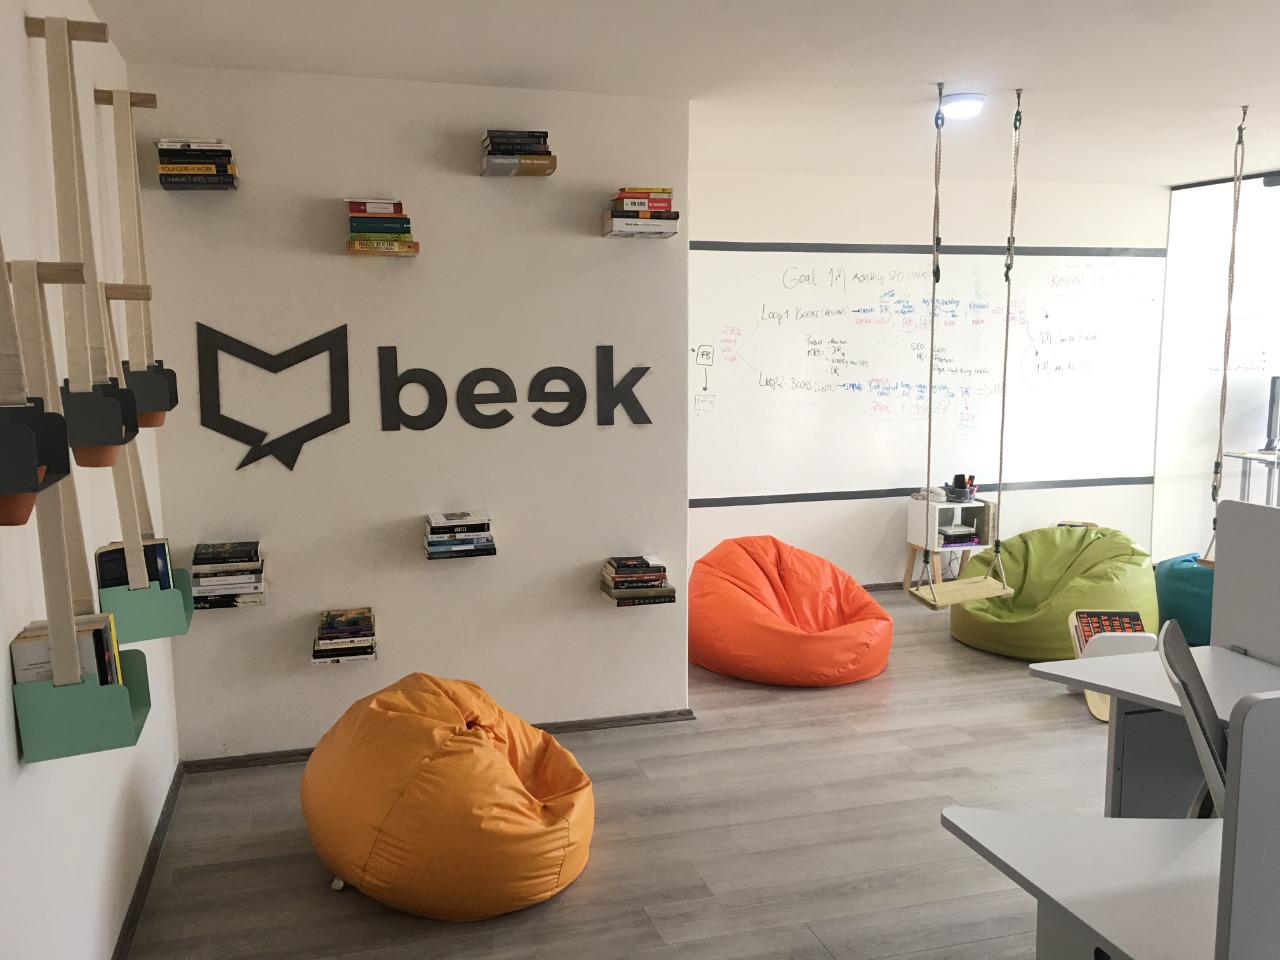 Mexican Audiobook Startup Beek Acquires Silicon Valley-based A.i. Company